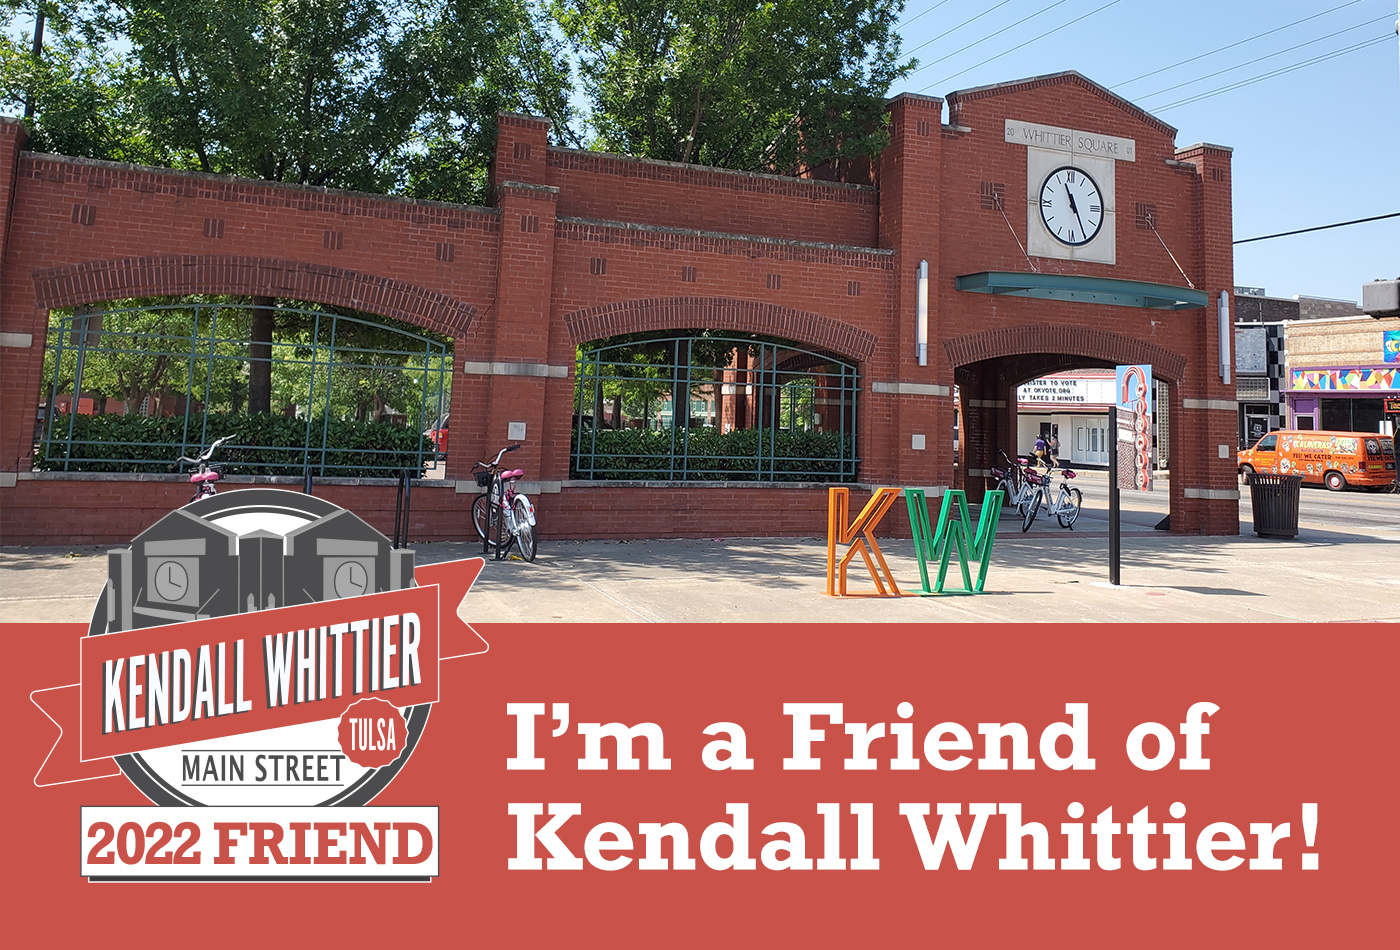 Become a Friend of Kendall Whittier